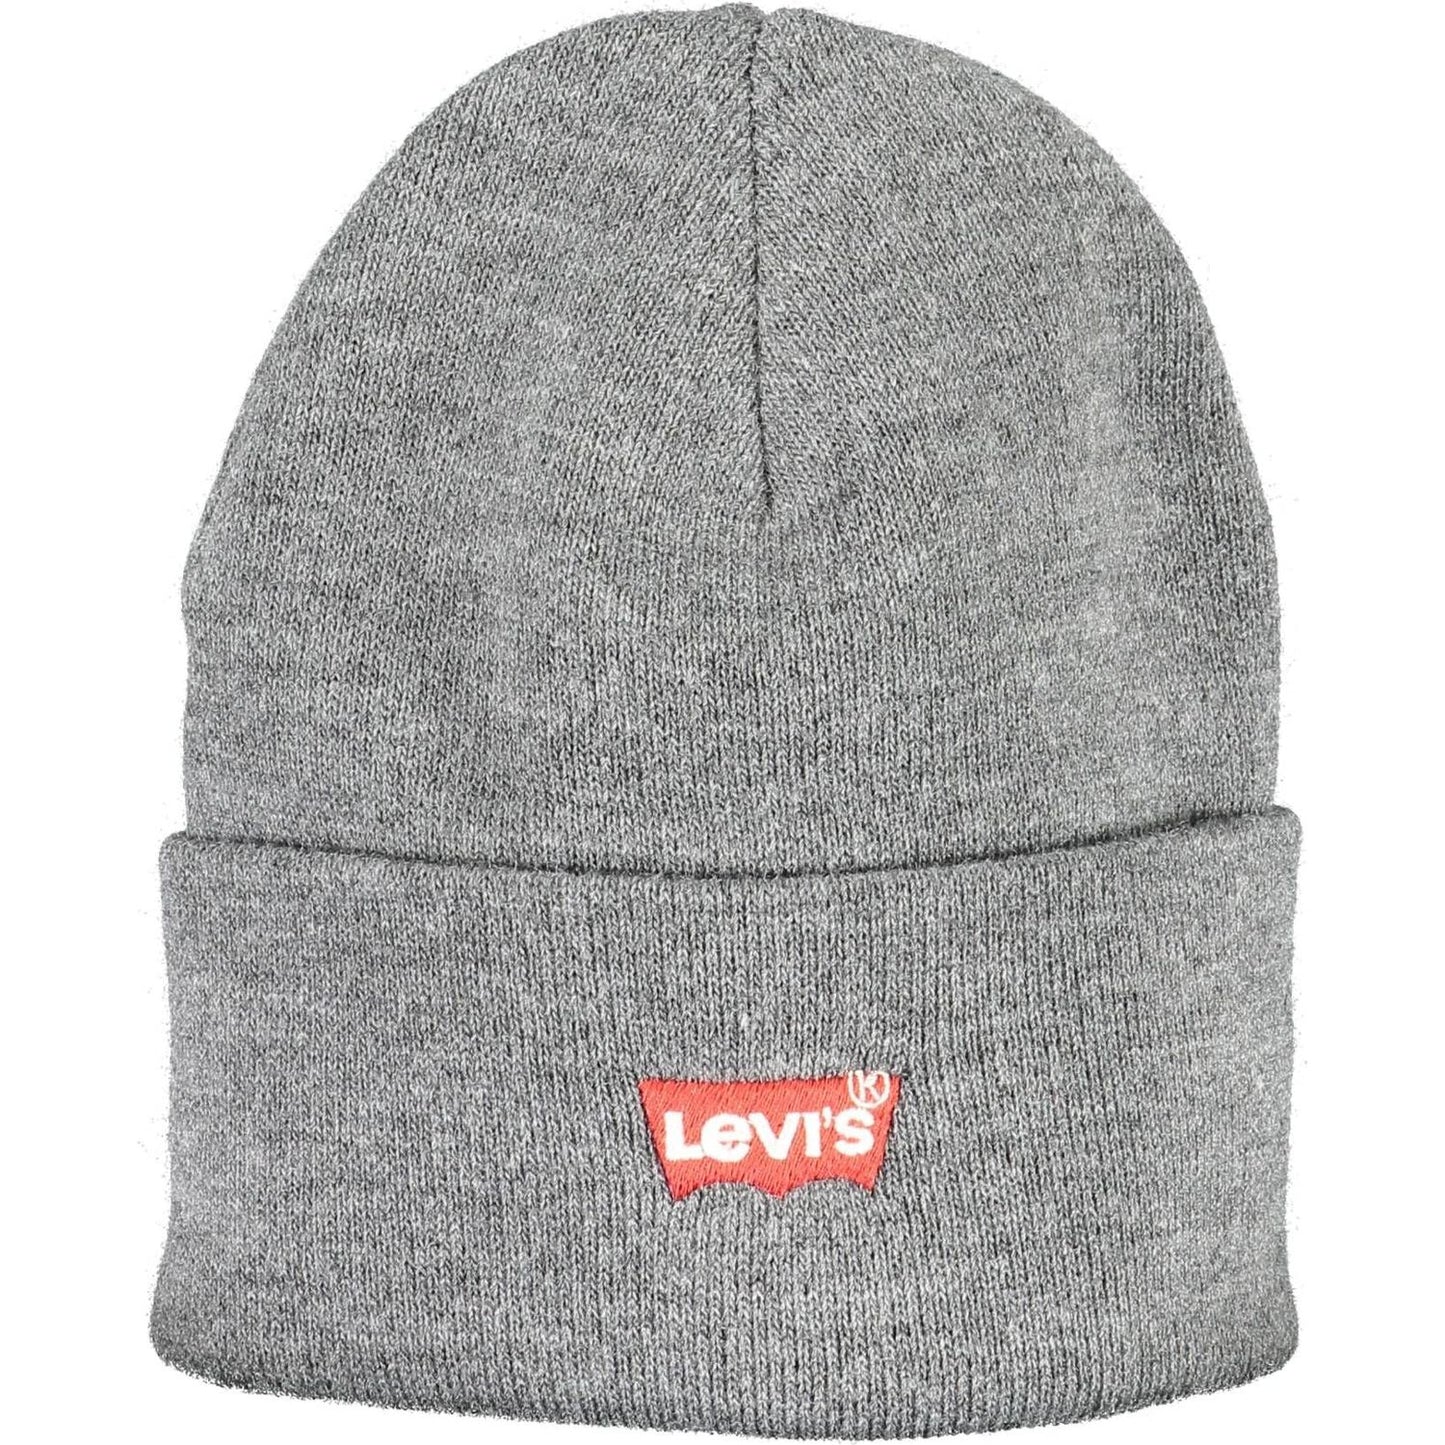 Chic Embroidered Logo Cap in Gray Levi's